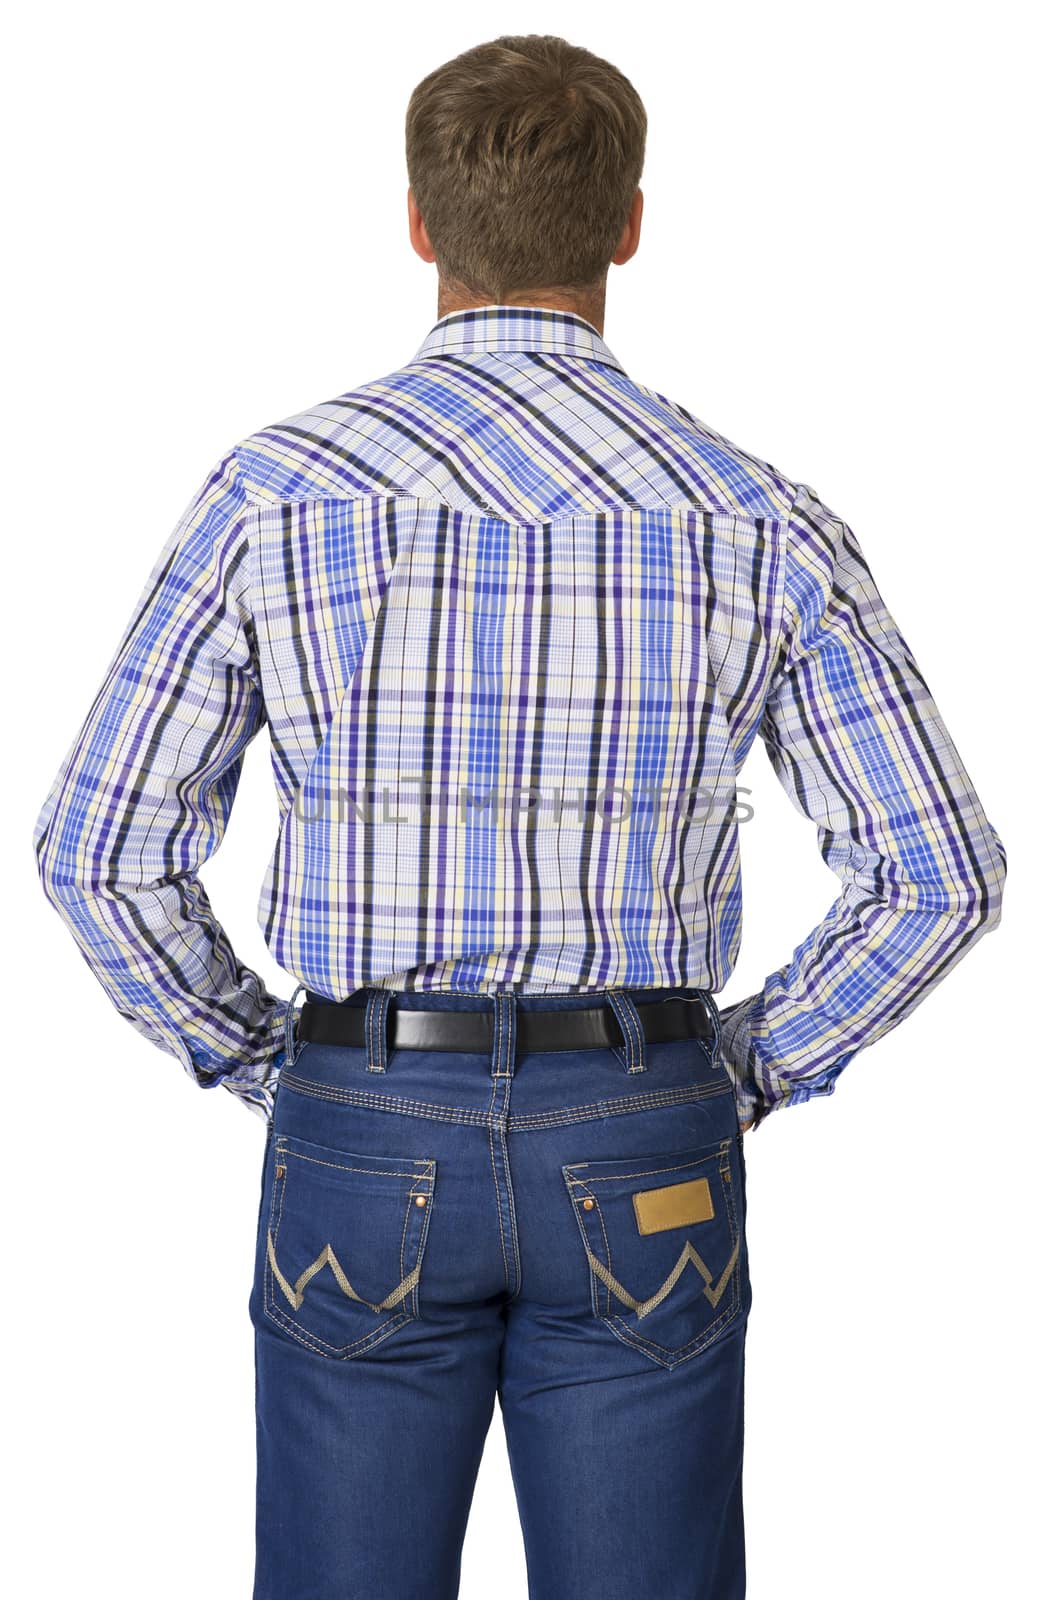 Portrait young man. Hands in pockets of jeans. Back view. White background